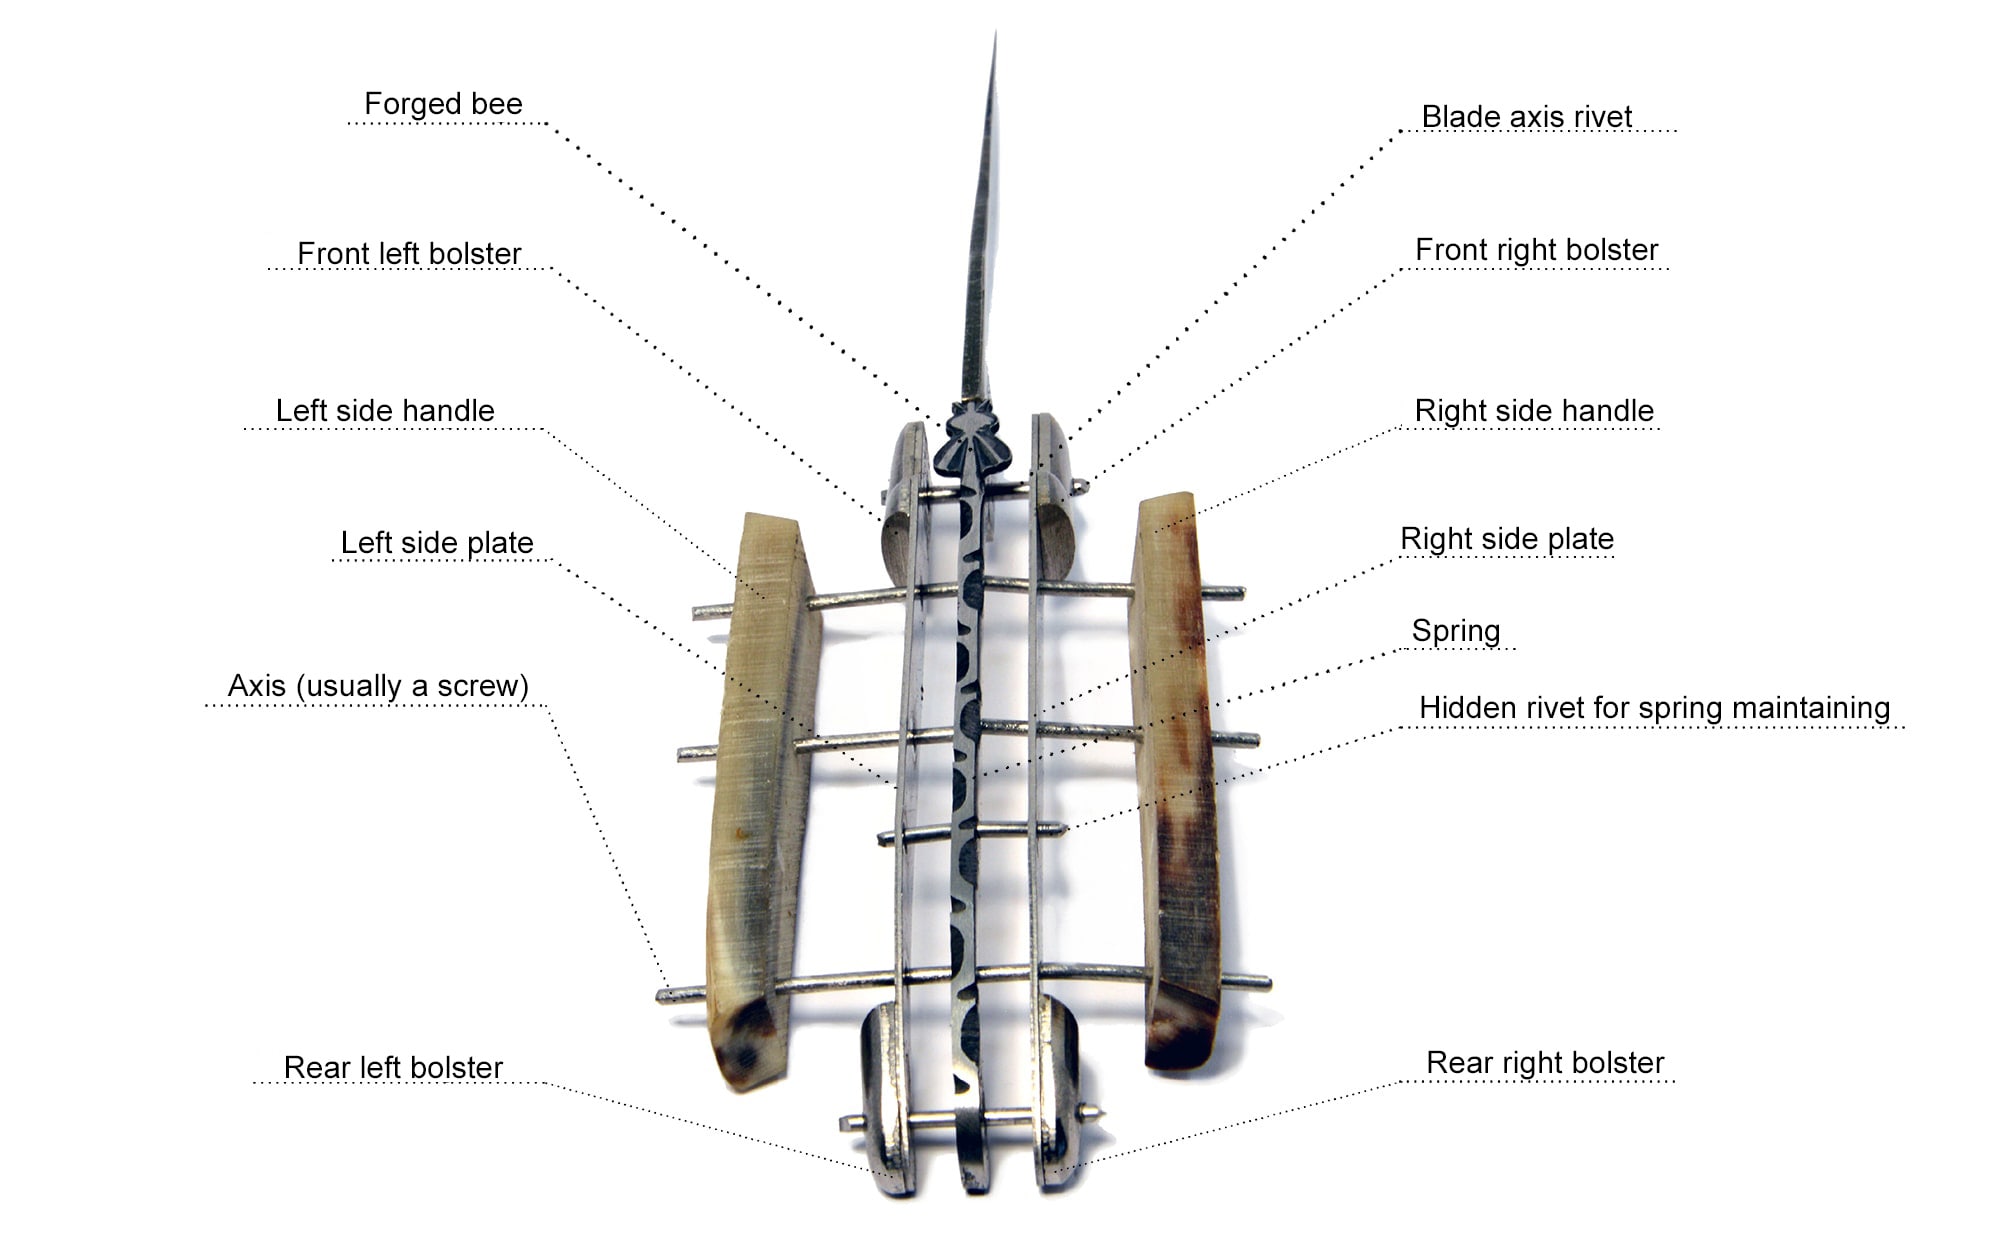 General Anatomy of a Laguiole knife.